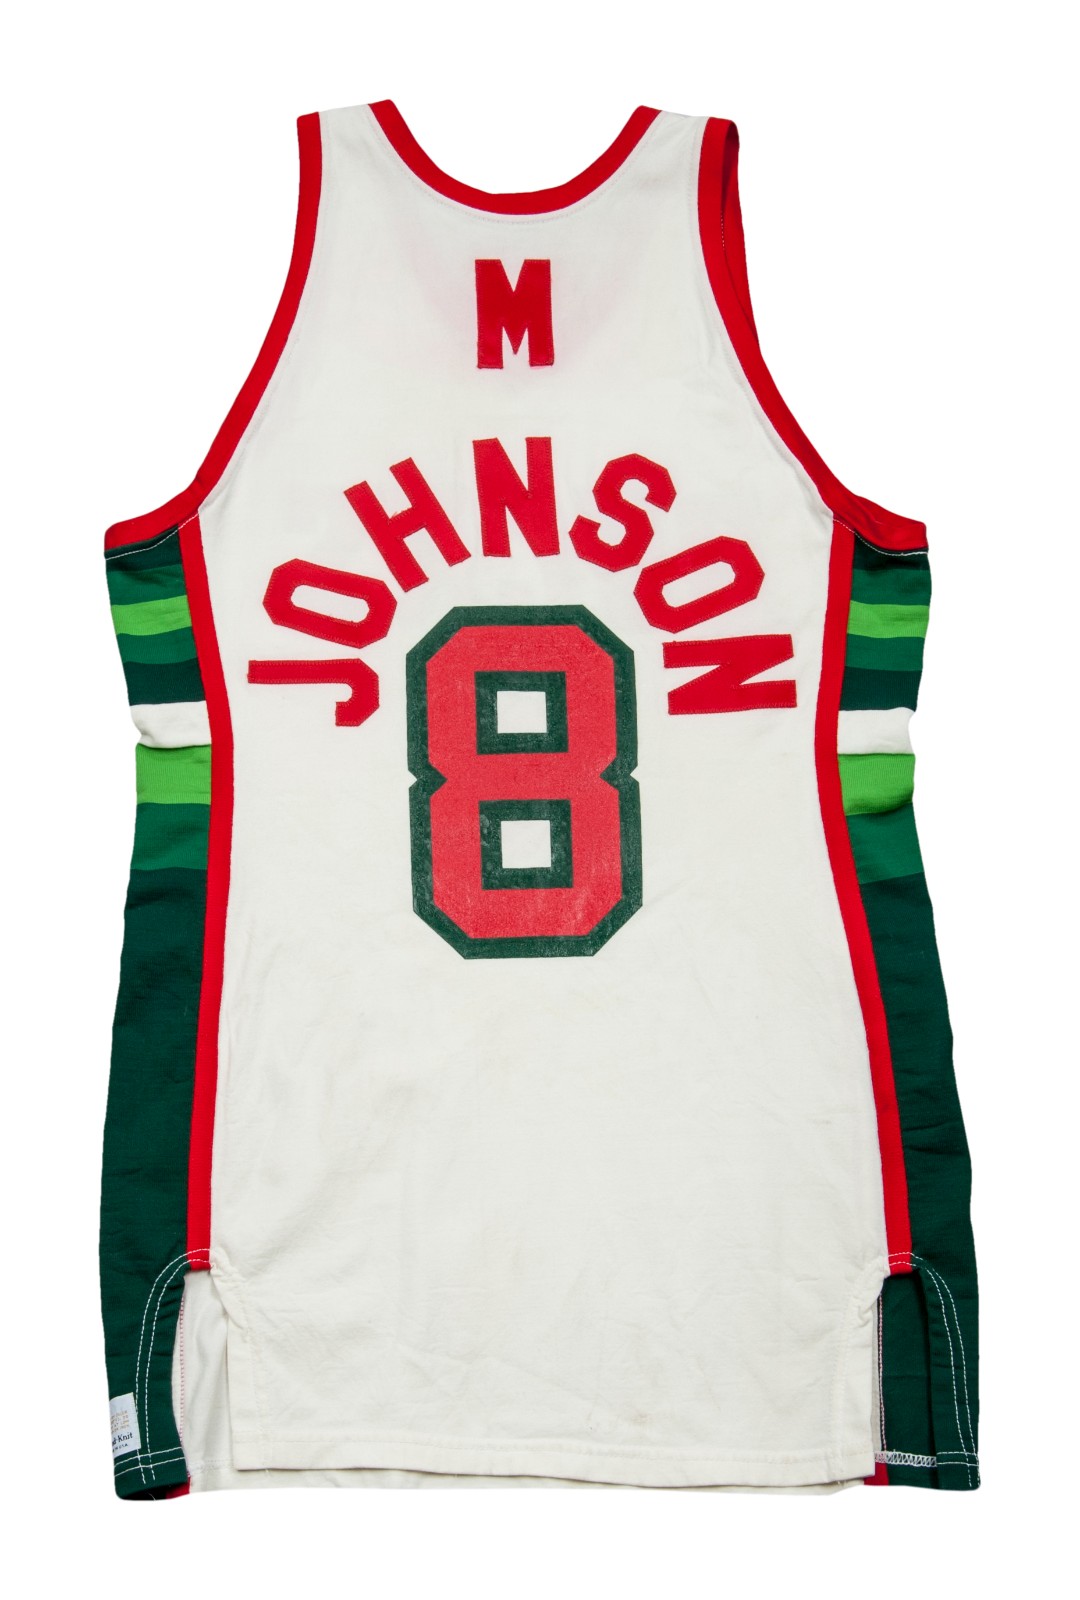 Basketball Forever - The Milwaukee Bucks will be rocking these vintage  jerseys this season 🔥